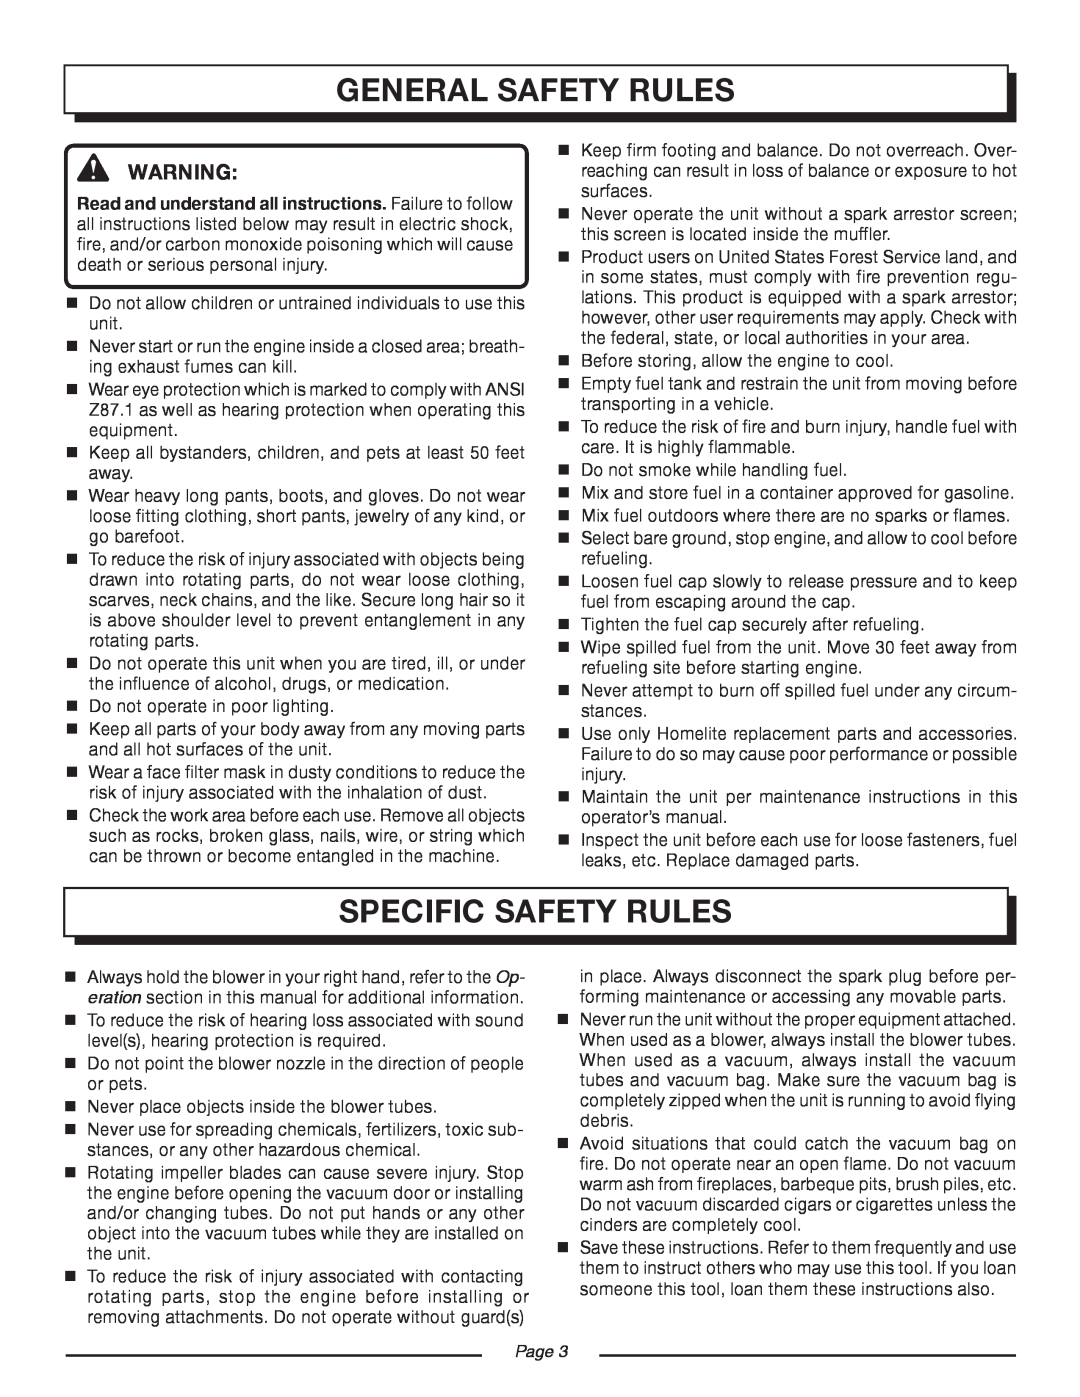 Homelite UT08934D manual General Safety Rules, Specific Safety Rules, Page 